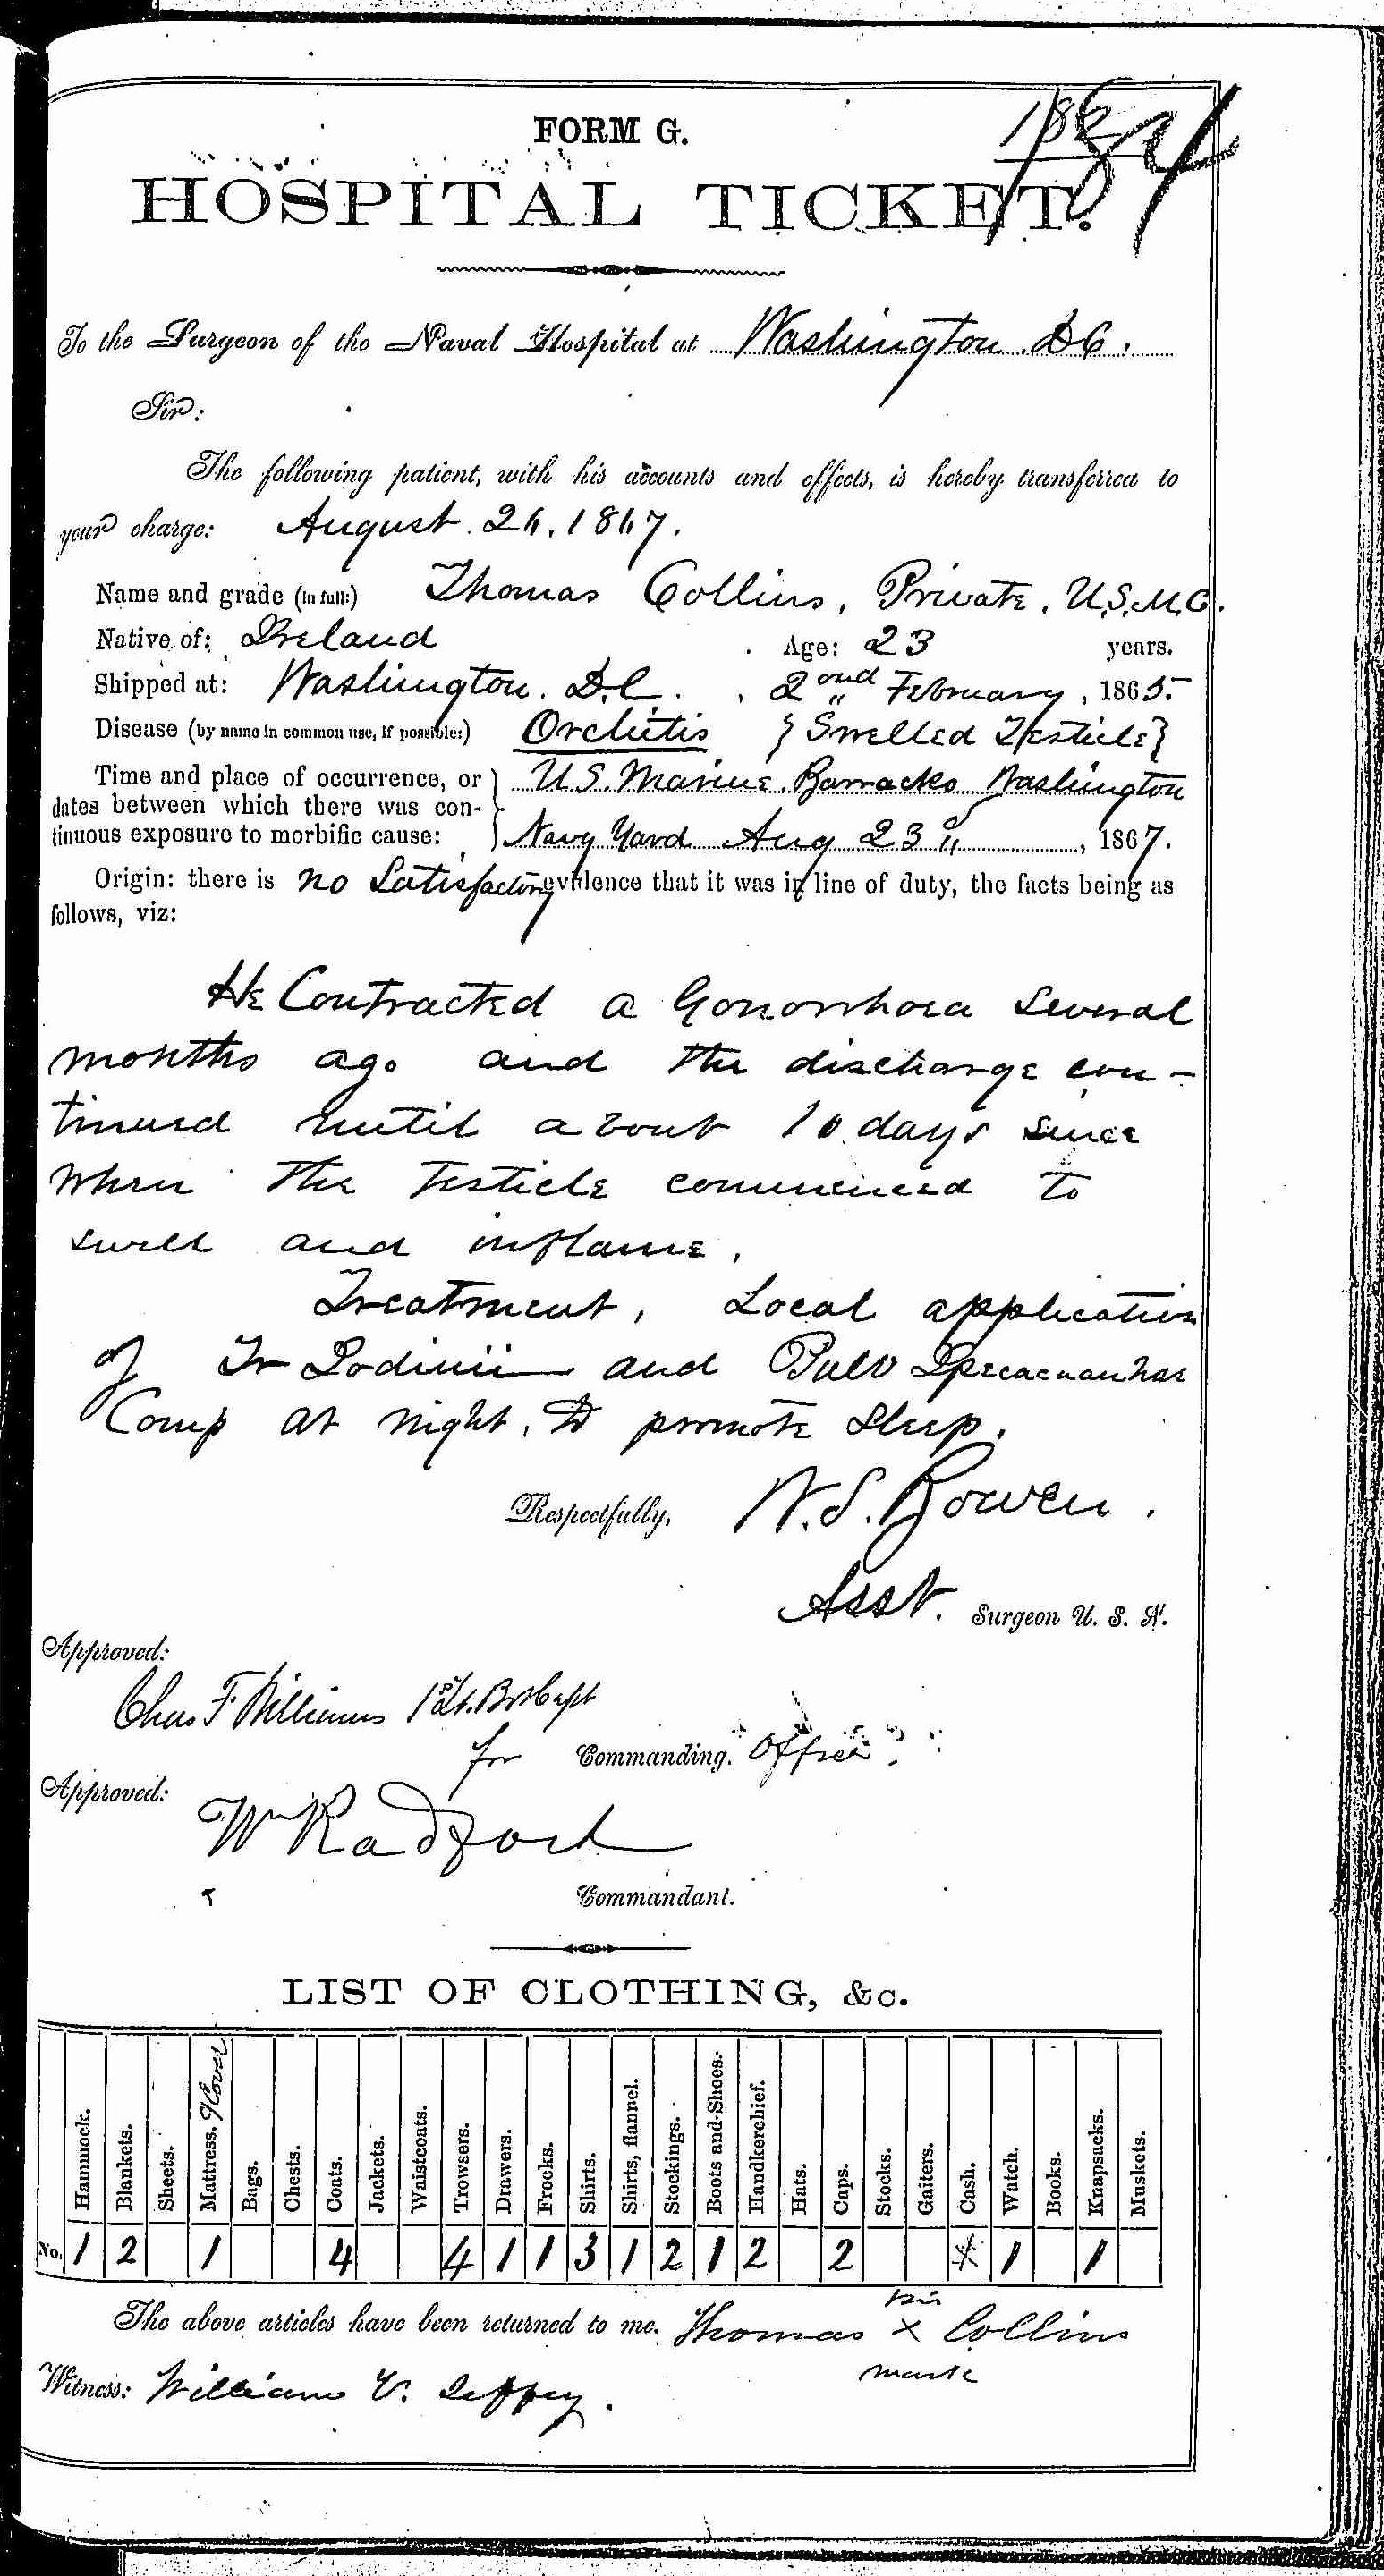 Entry for Thomas Collins (second admission page 2 of 2) in the log Hospital Tickets and Case Papers - Naval Hospital - Washington, D.C. - 1866-68